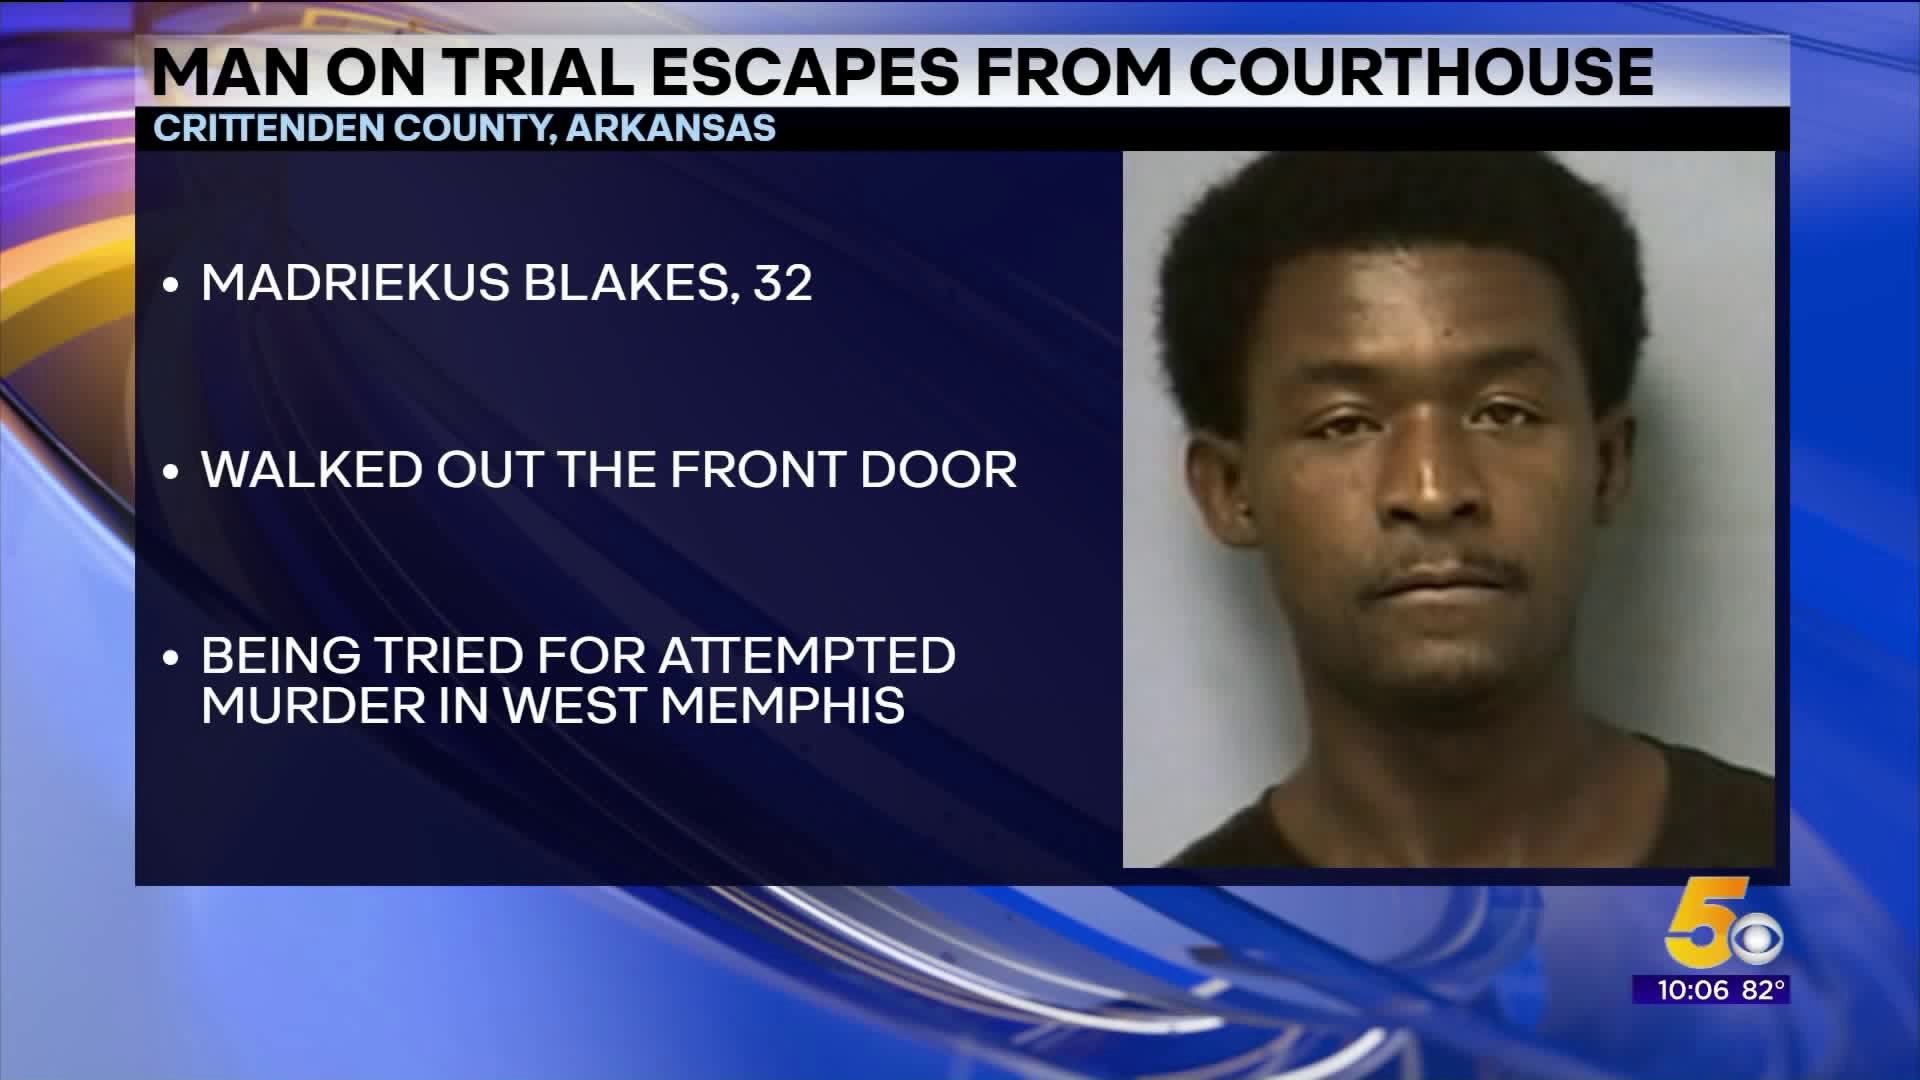 Man on Trial Escapes from Courthouse